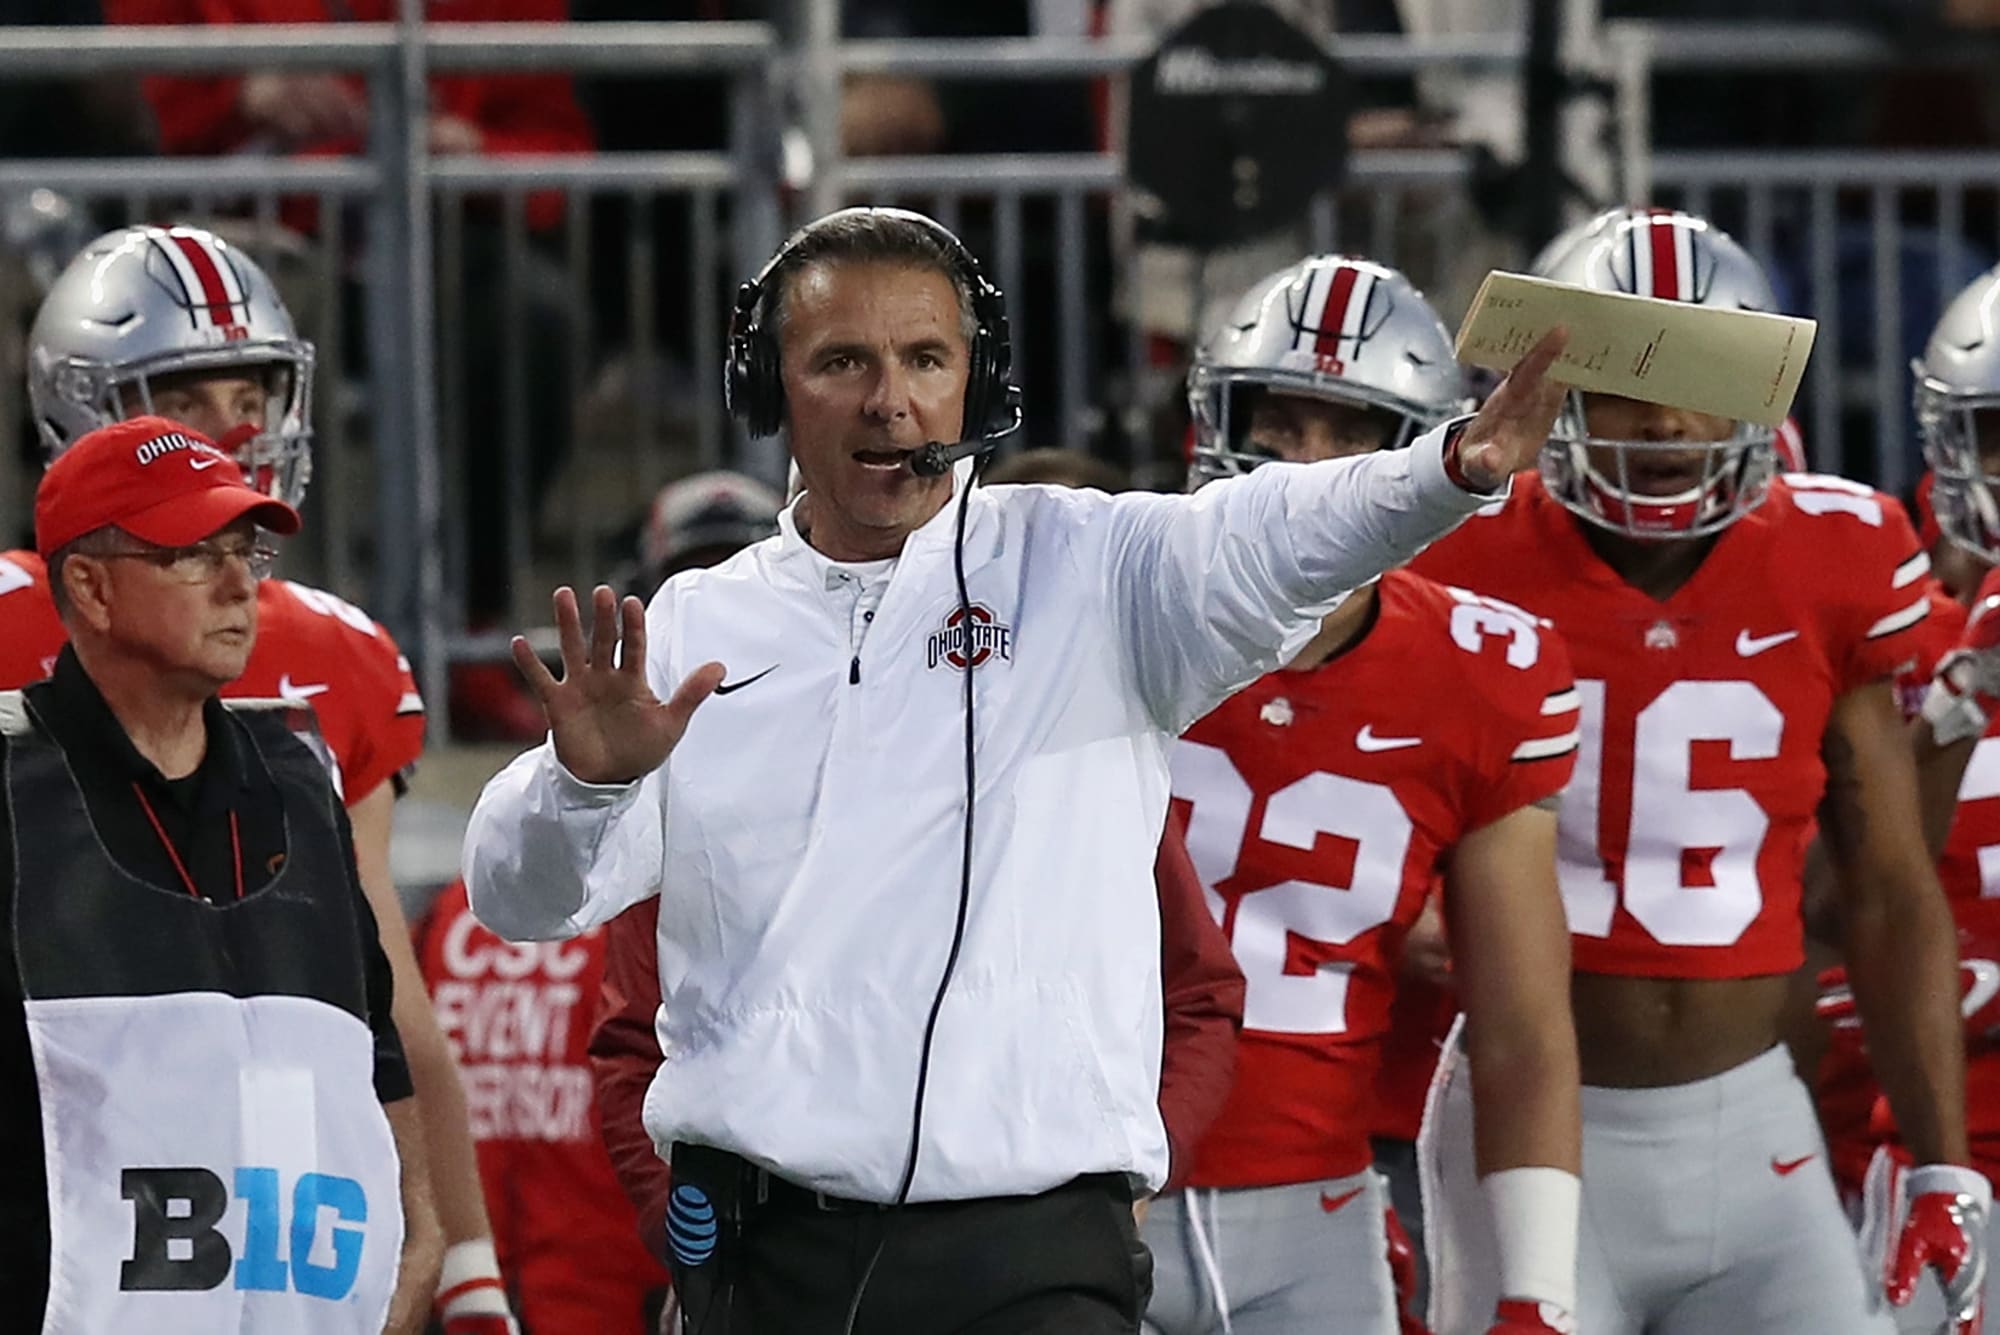 Ohio State Football Top 10 coaches in program history